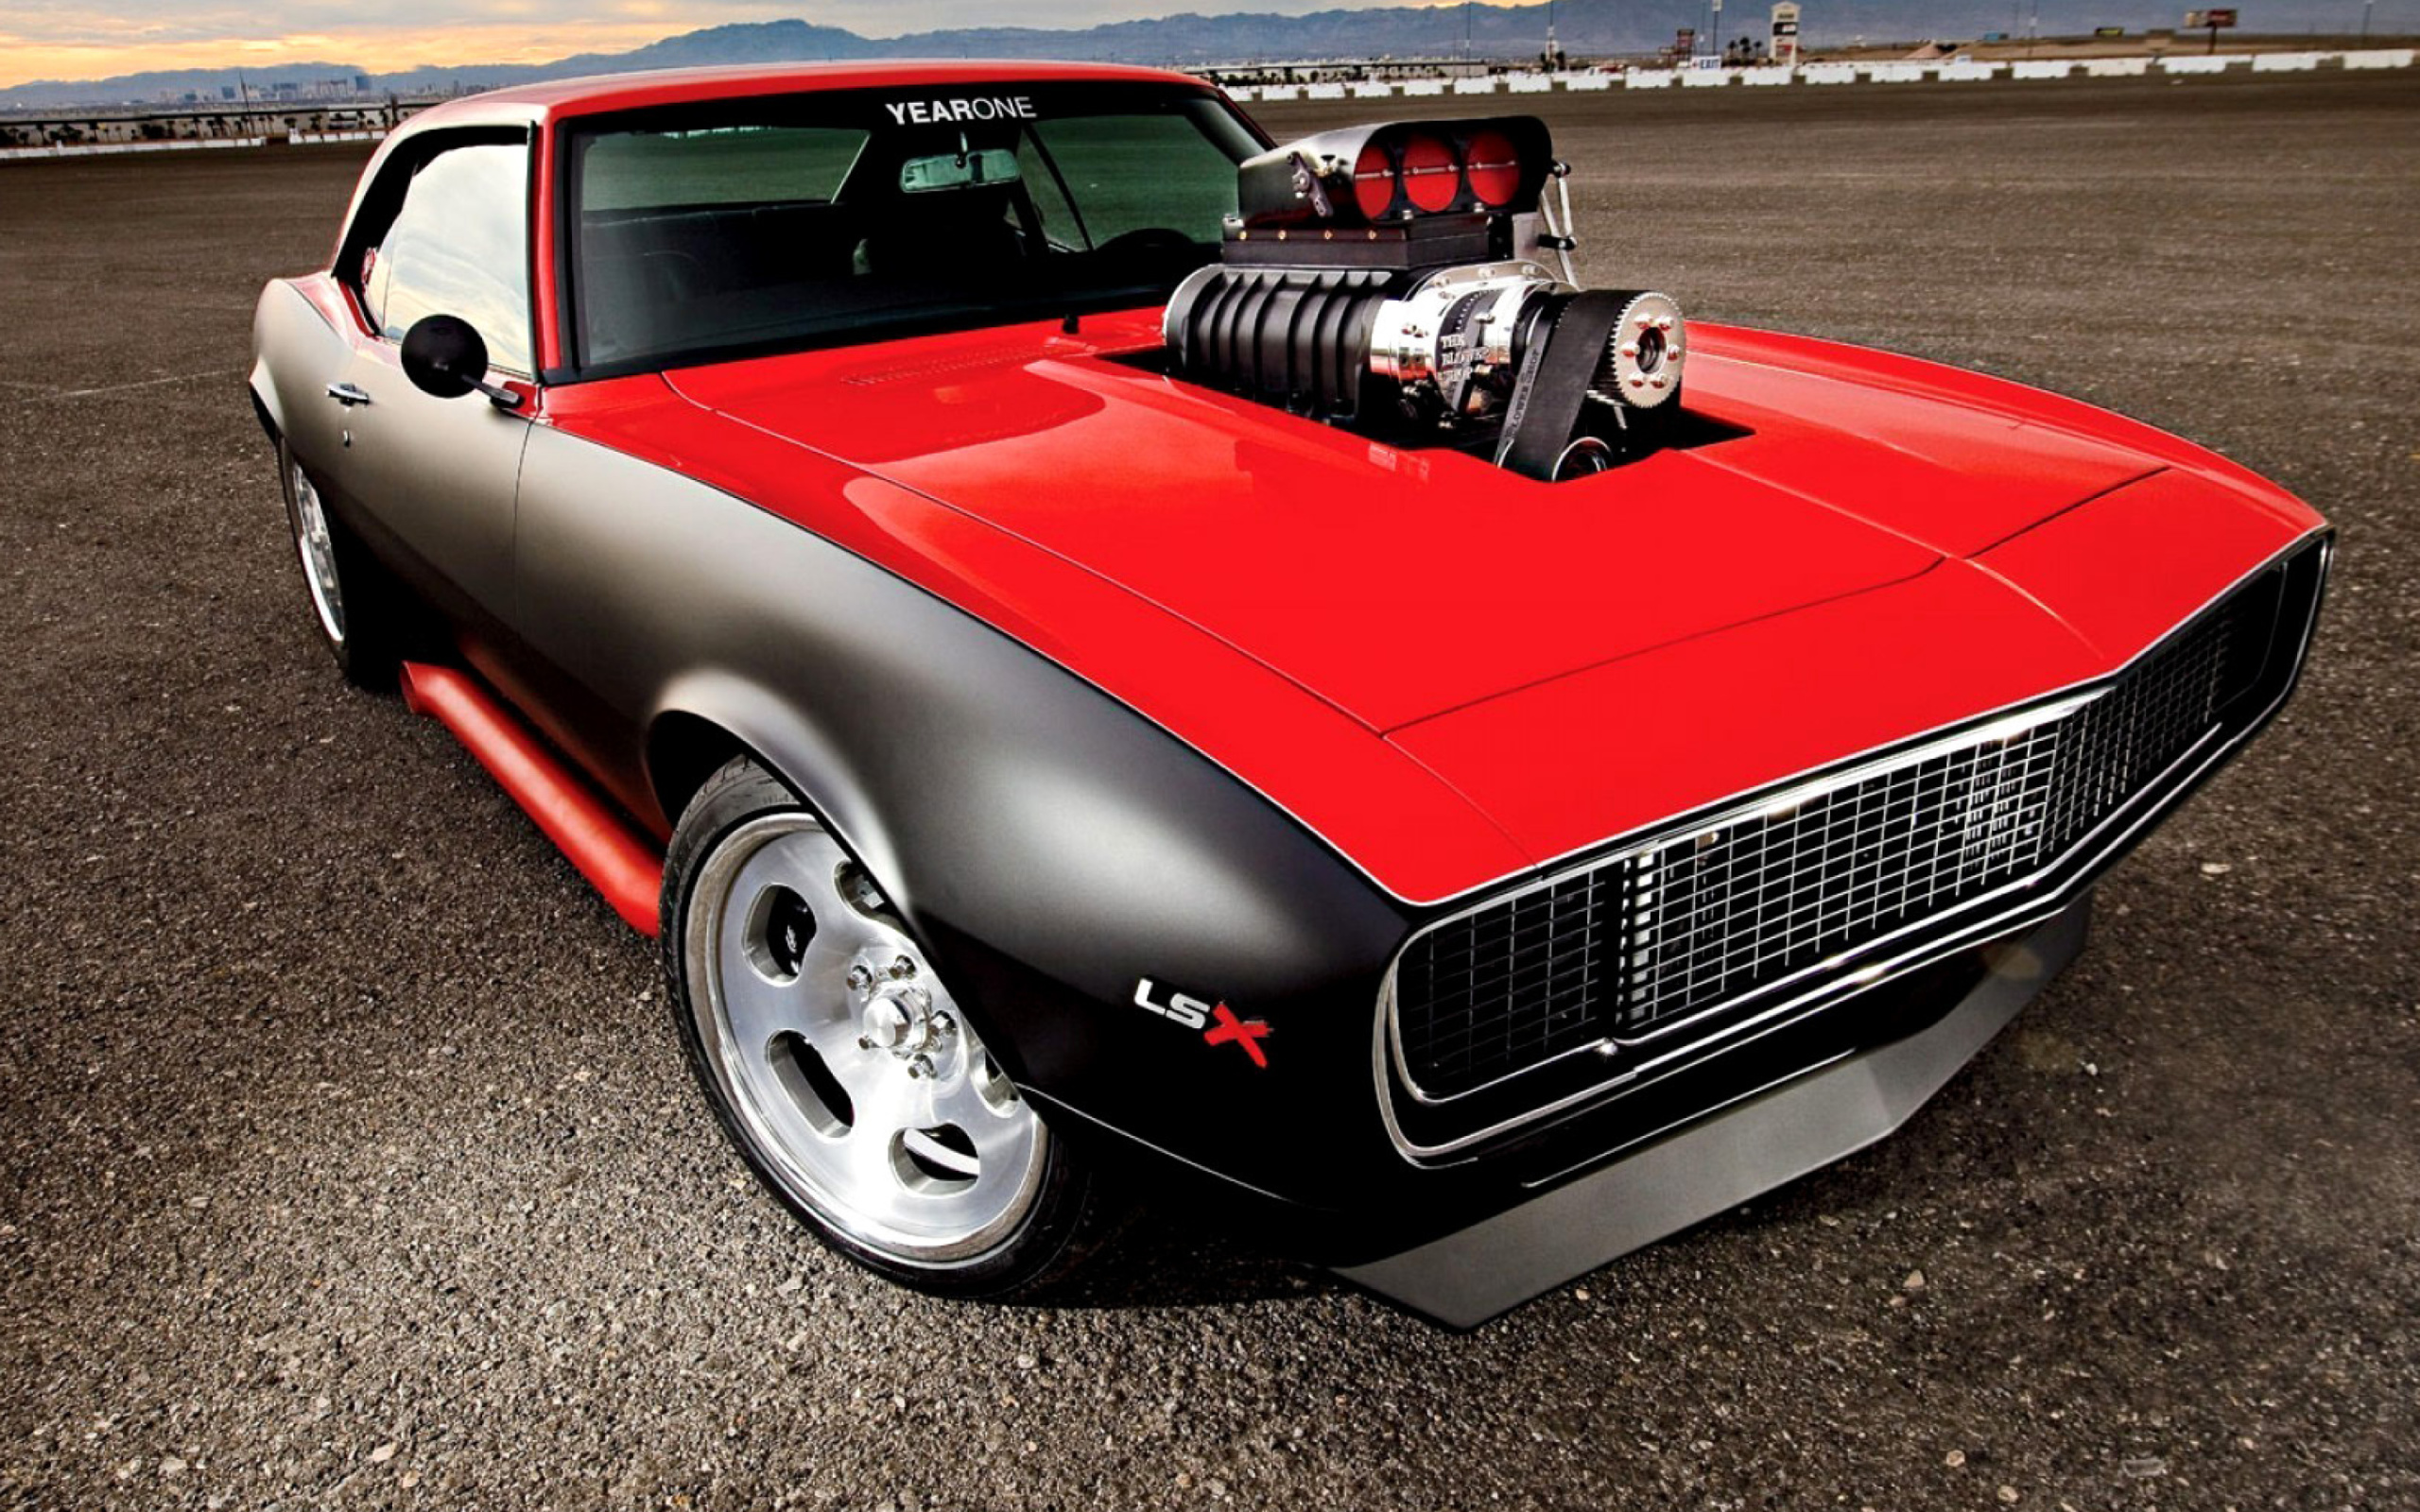 Chevrolet Hot Rod Muscle Car with GM Engine wallpaper 2560x1600